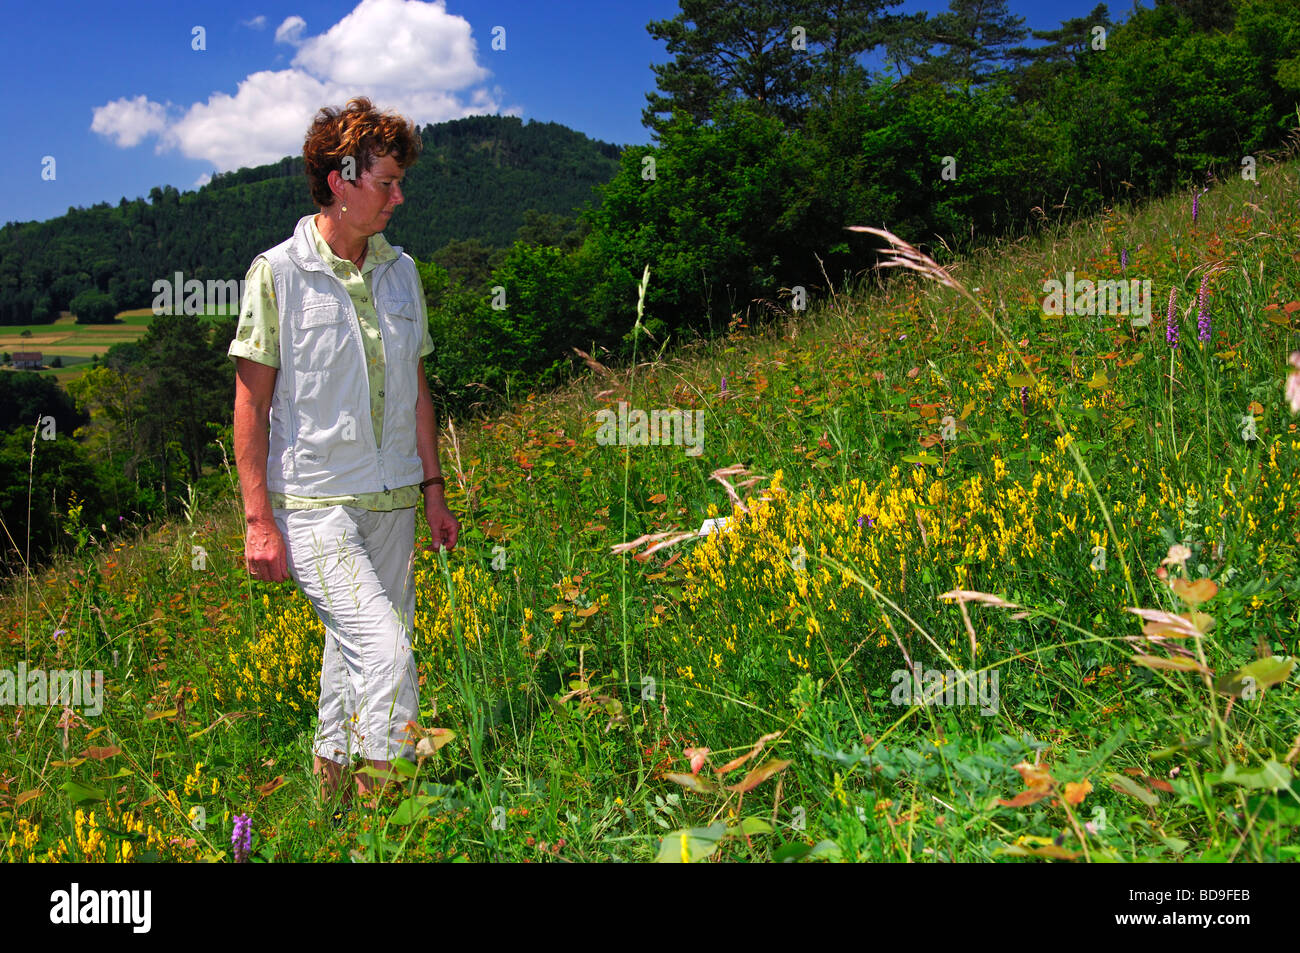 Femal person looking at plants during an observation tour along the orchid trail, Erlingsbach, Switzerland Stock Photo